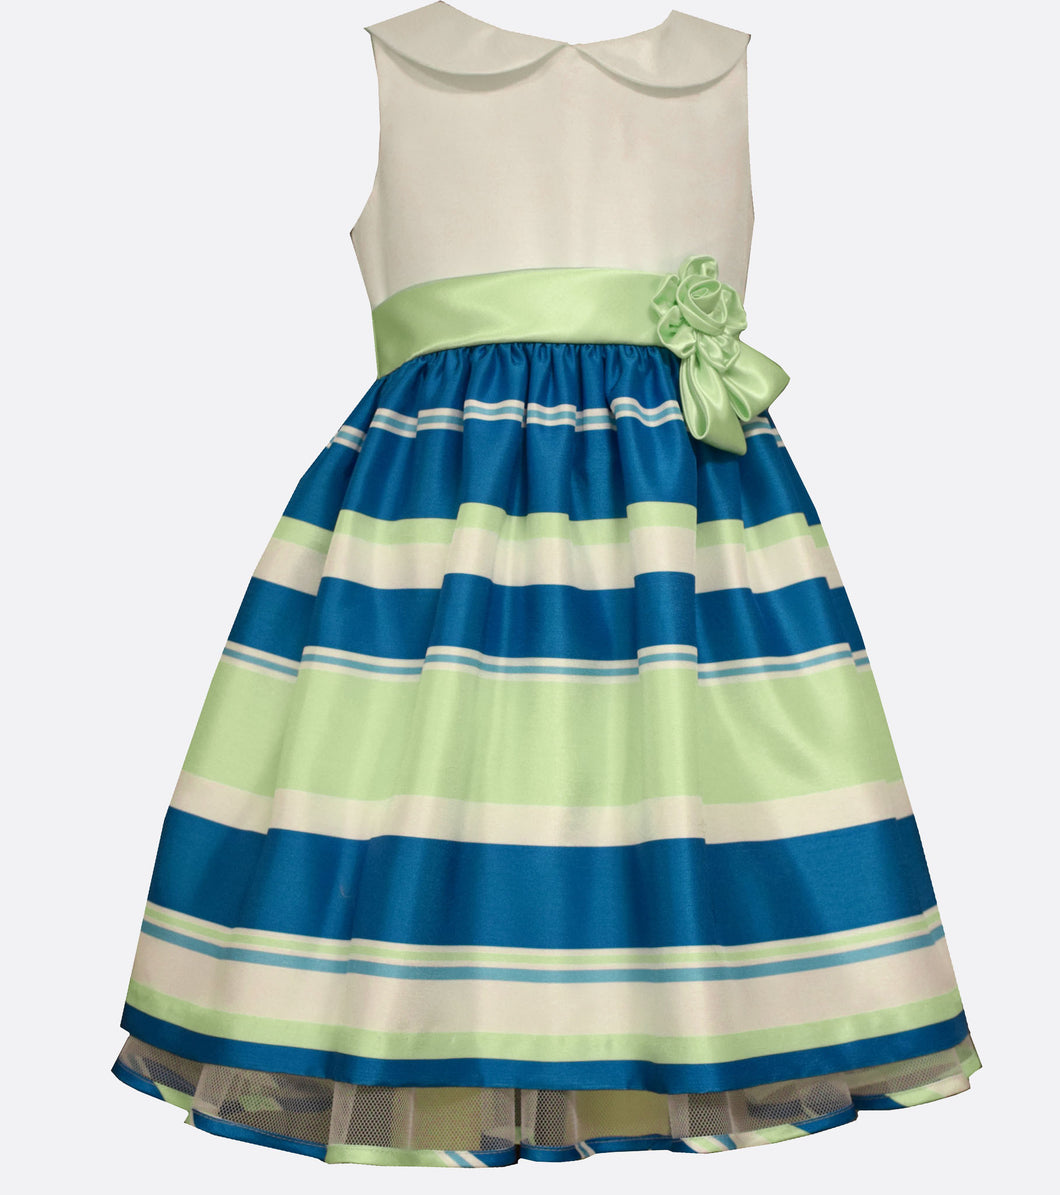 Bonnie Jean teal and green stripe shantung party dress